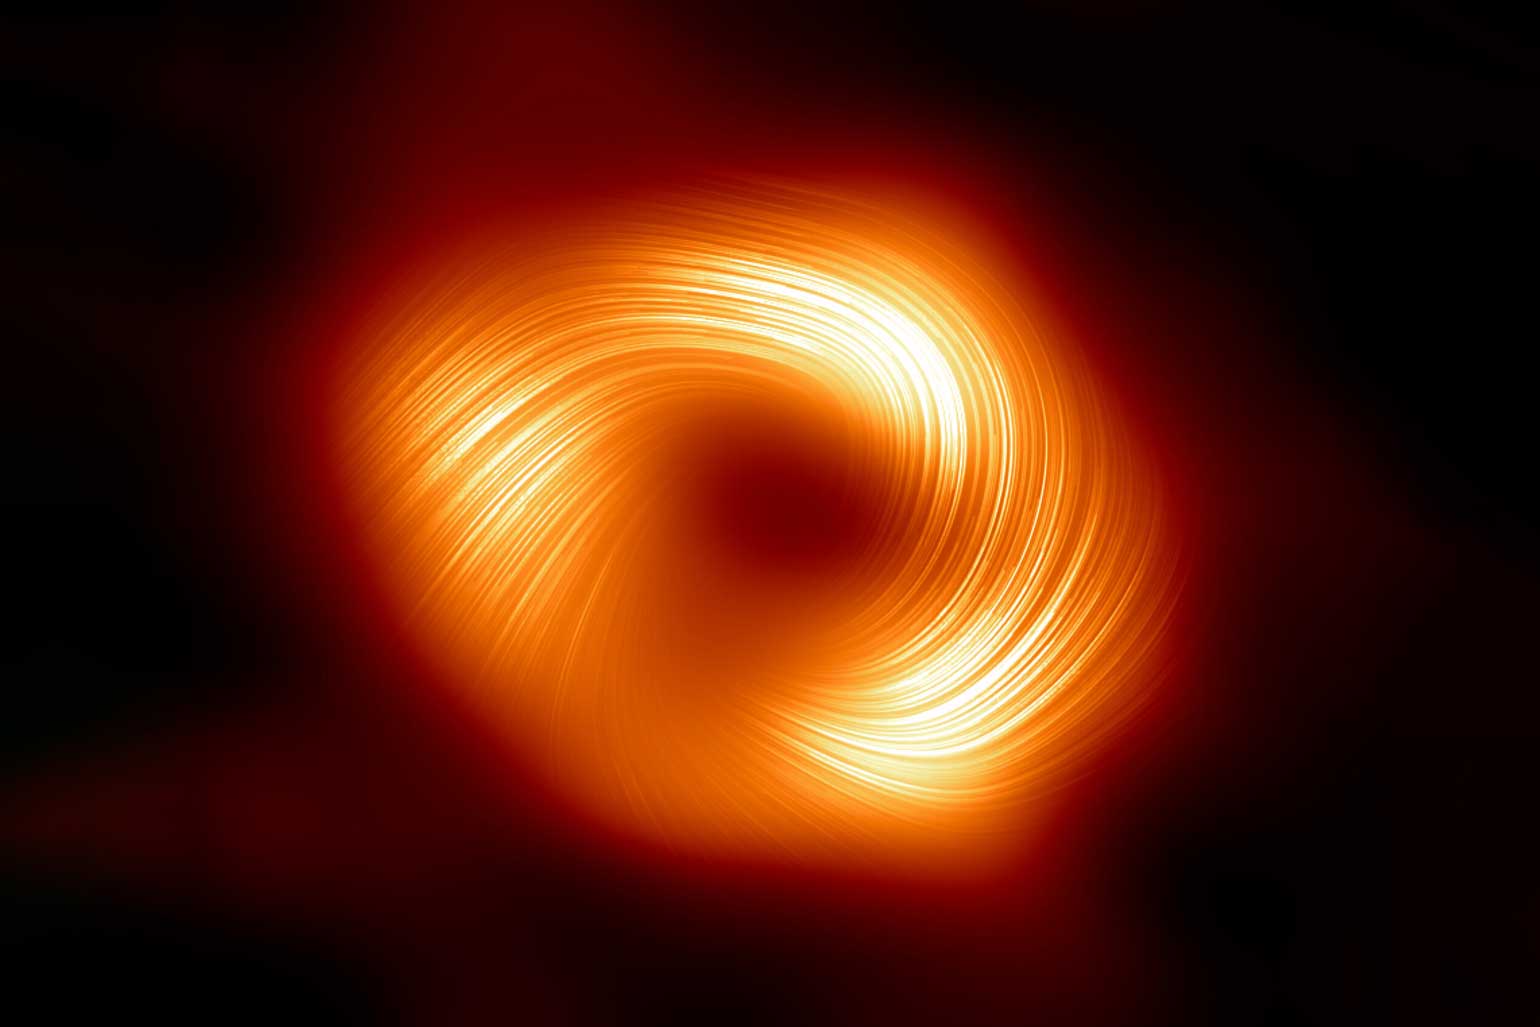 first ever image of our Milky Way black hole